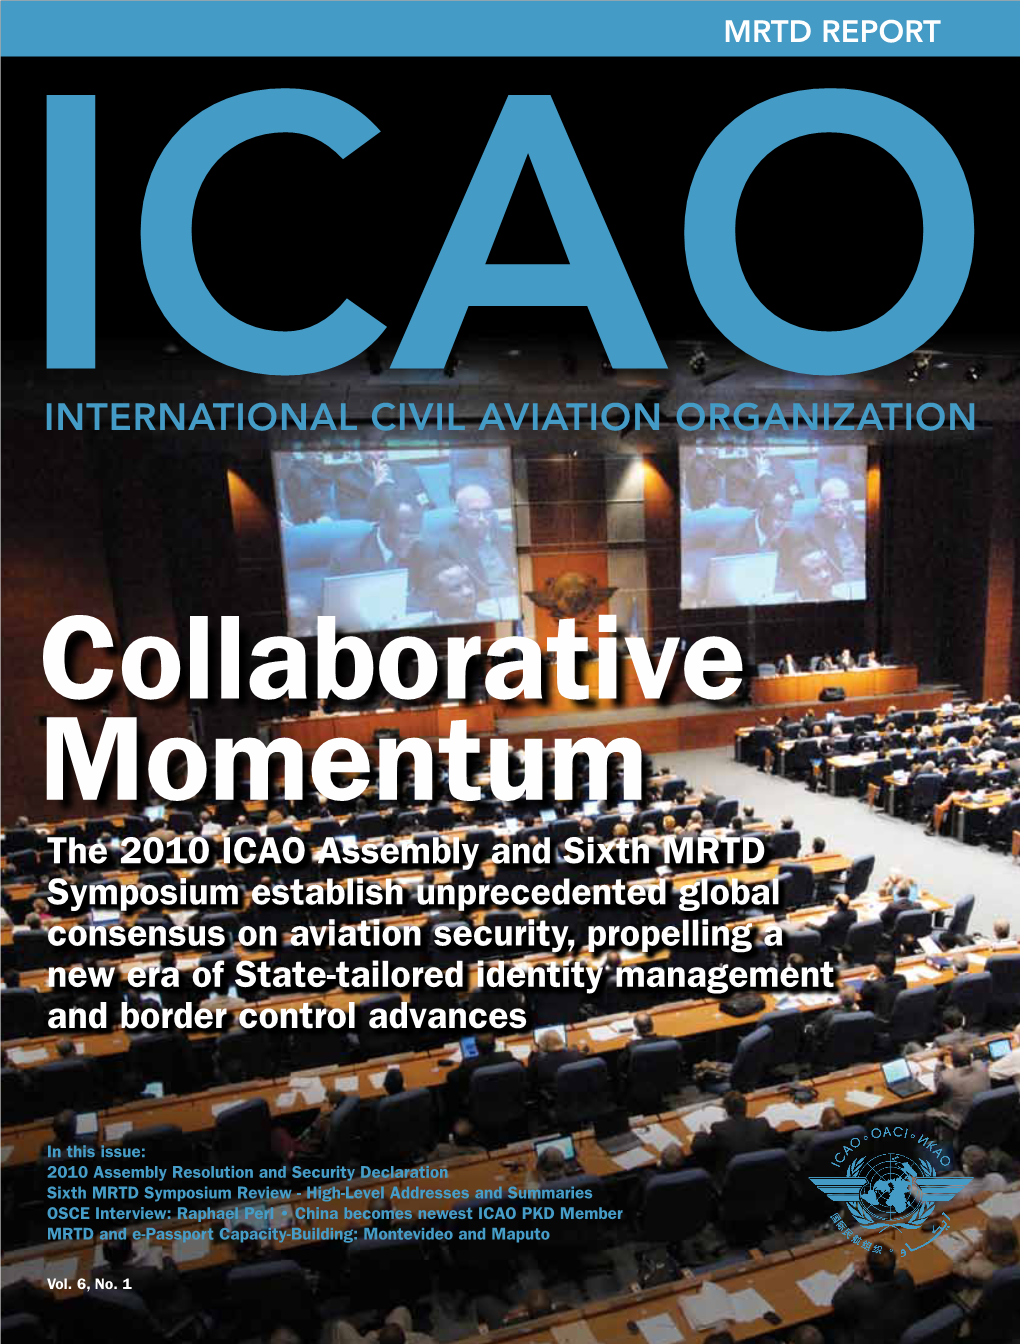 The 2010 ICAO Assembly and Sixth MRTD Symposium Establish